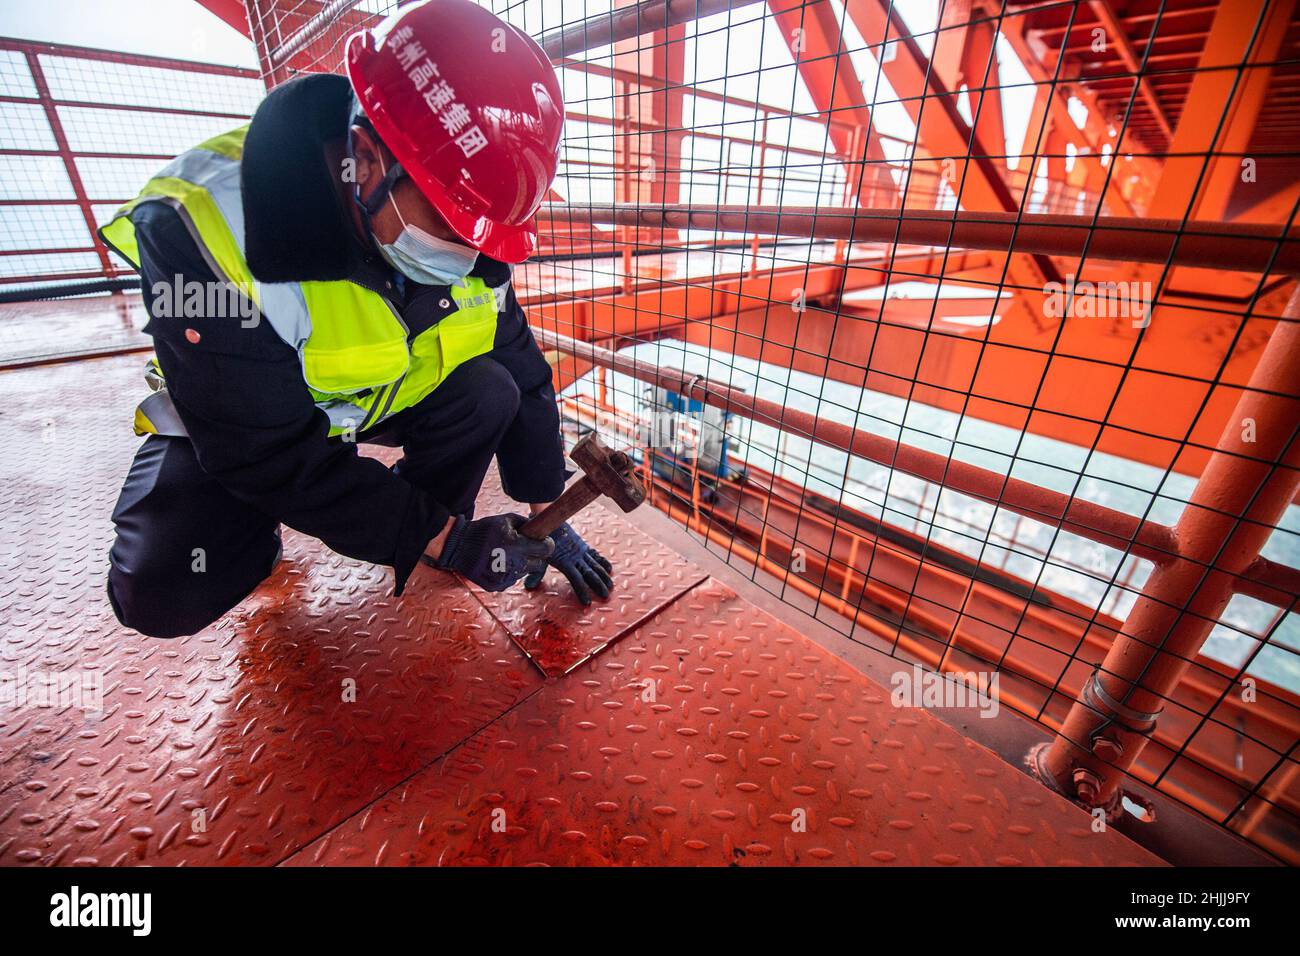 Liupanshui. 29th Jan, 2022. A worker carries out maintenance tasks on the Beipanjiang Bridge in southwest China's Guizhou Province, Jan. 29, 2022. Sitting over 565.4 meters above a valley, the Beipanjiang Bridge has been certified as the world's highest bridge by the Guinness World Records. Spanning 1,341.4 meters, the bridge links Duge Township of Liupanshui in southwest China's Guizhou with Puli Township of Xuanwei in southwest China's Yunnan Province. Credit: Tao Liang/Xinhua/Alamy Live News Stock Photo